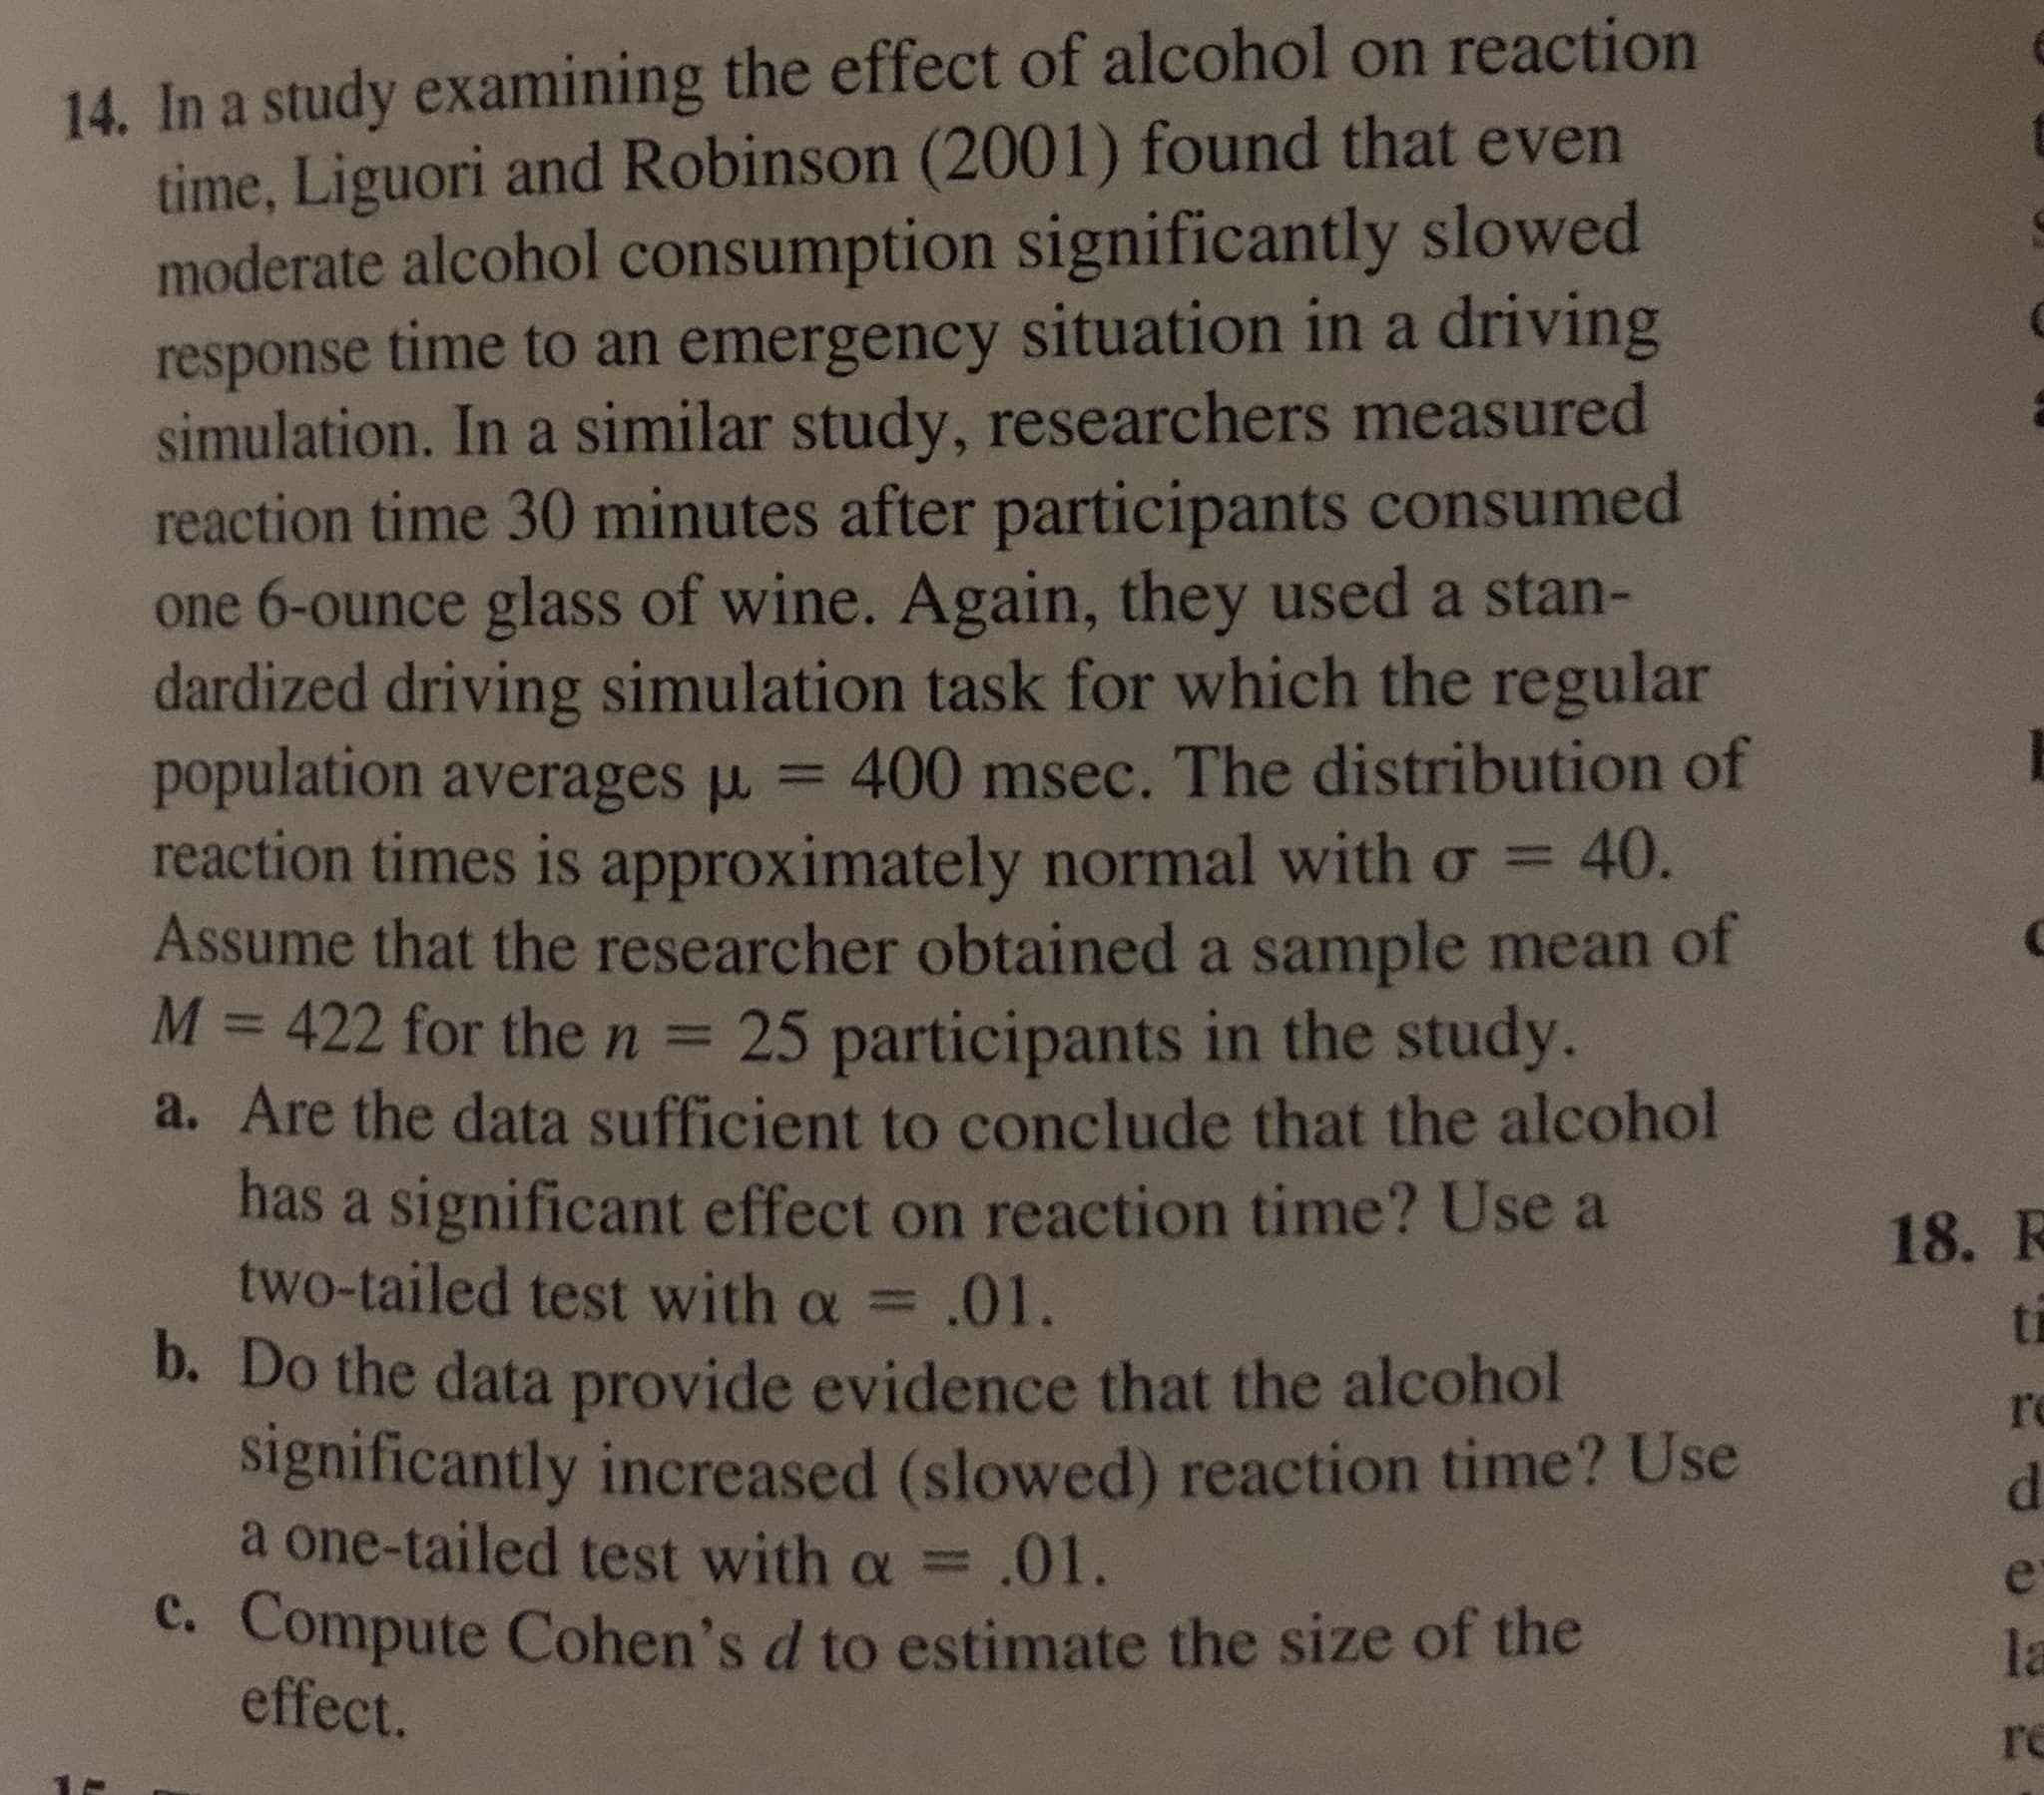 14. In a study examining the effect of alcohol on reaction
time, Liguori and Robinson (2001) found that even
moderate alcohol consumption significantly slowed
response time to an emergency situation in a driving
simulation. In a similar study, researchers measured
reaction time 30 minutes after participants consumed
one 6-ounce glass of wine. Again, they used a stan-
dardized driving simulation task for which the regular
population averages u
reaction times is approximately normal with o =
Assume that the researcher obtained a sample mean of
M = 422 for the n = 25 participants in the study.
a. Are the data sufficient to conclude that the alcohol
has a significant effect on reaction time? Use a
two-tailed test with a =
400 msec. The distribution of
40.
%3D
%3D
%3D
18. R
.01.
ti
b. Do the data provide evidence that the alcohol
significantly increased (slowed) reaction time? Use
a one-tailed test with a = .01.
c. Compute Cohen's d to estimate the size of the
effect.
re
d.
la
re
